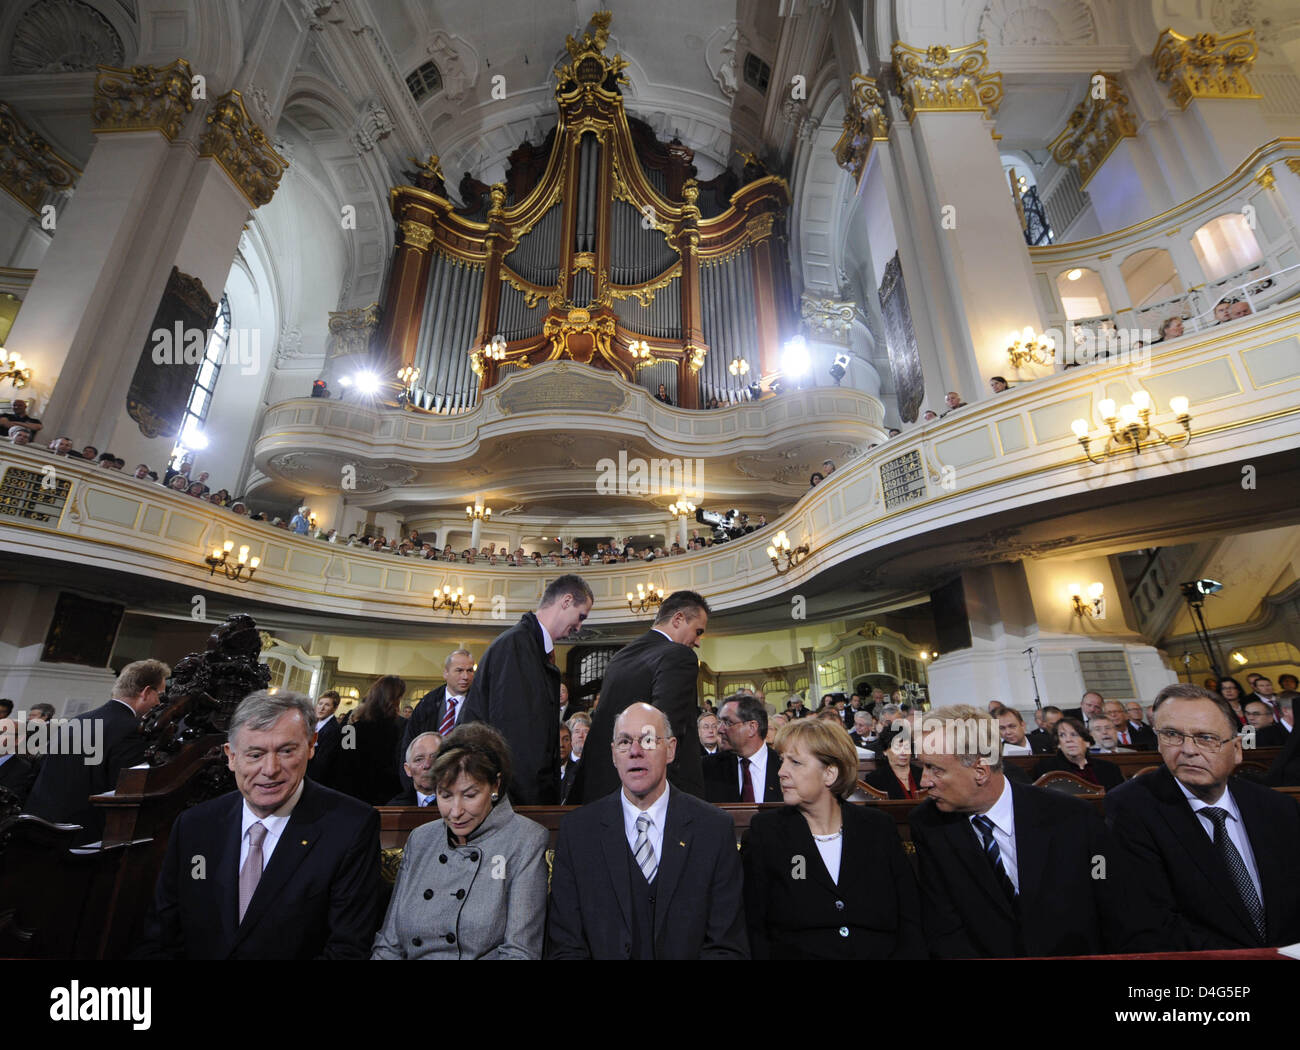 German President Horst Koehler (L-R), his wife Eva Luise, President of the German Parliament Norbert Lammert, German Chancellor Angela Merkel, Mayor of Hamburg Ole von Beust and President of the Constitutional Court Hans-Juergen Papier attend the ecumenical service on 'German Unity Day' at St. Michaelis Church, Hamburg, Germany, 03 October 2008. Over 1,500 guests gathered at Hambur Stock Photo